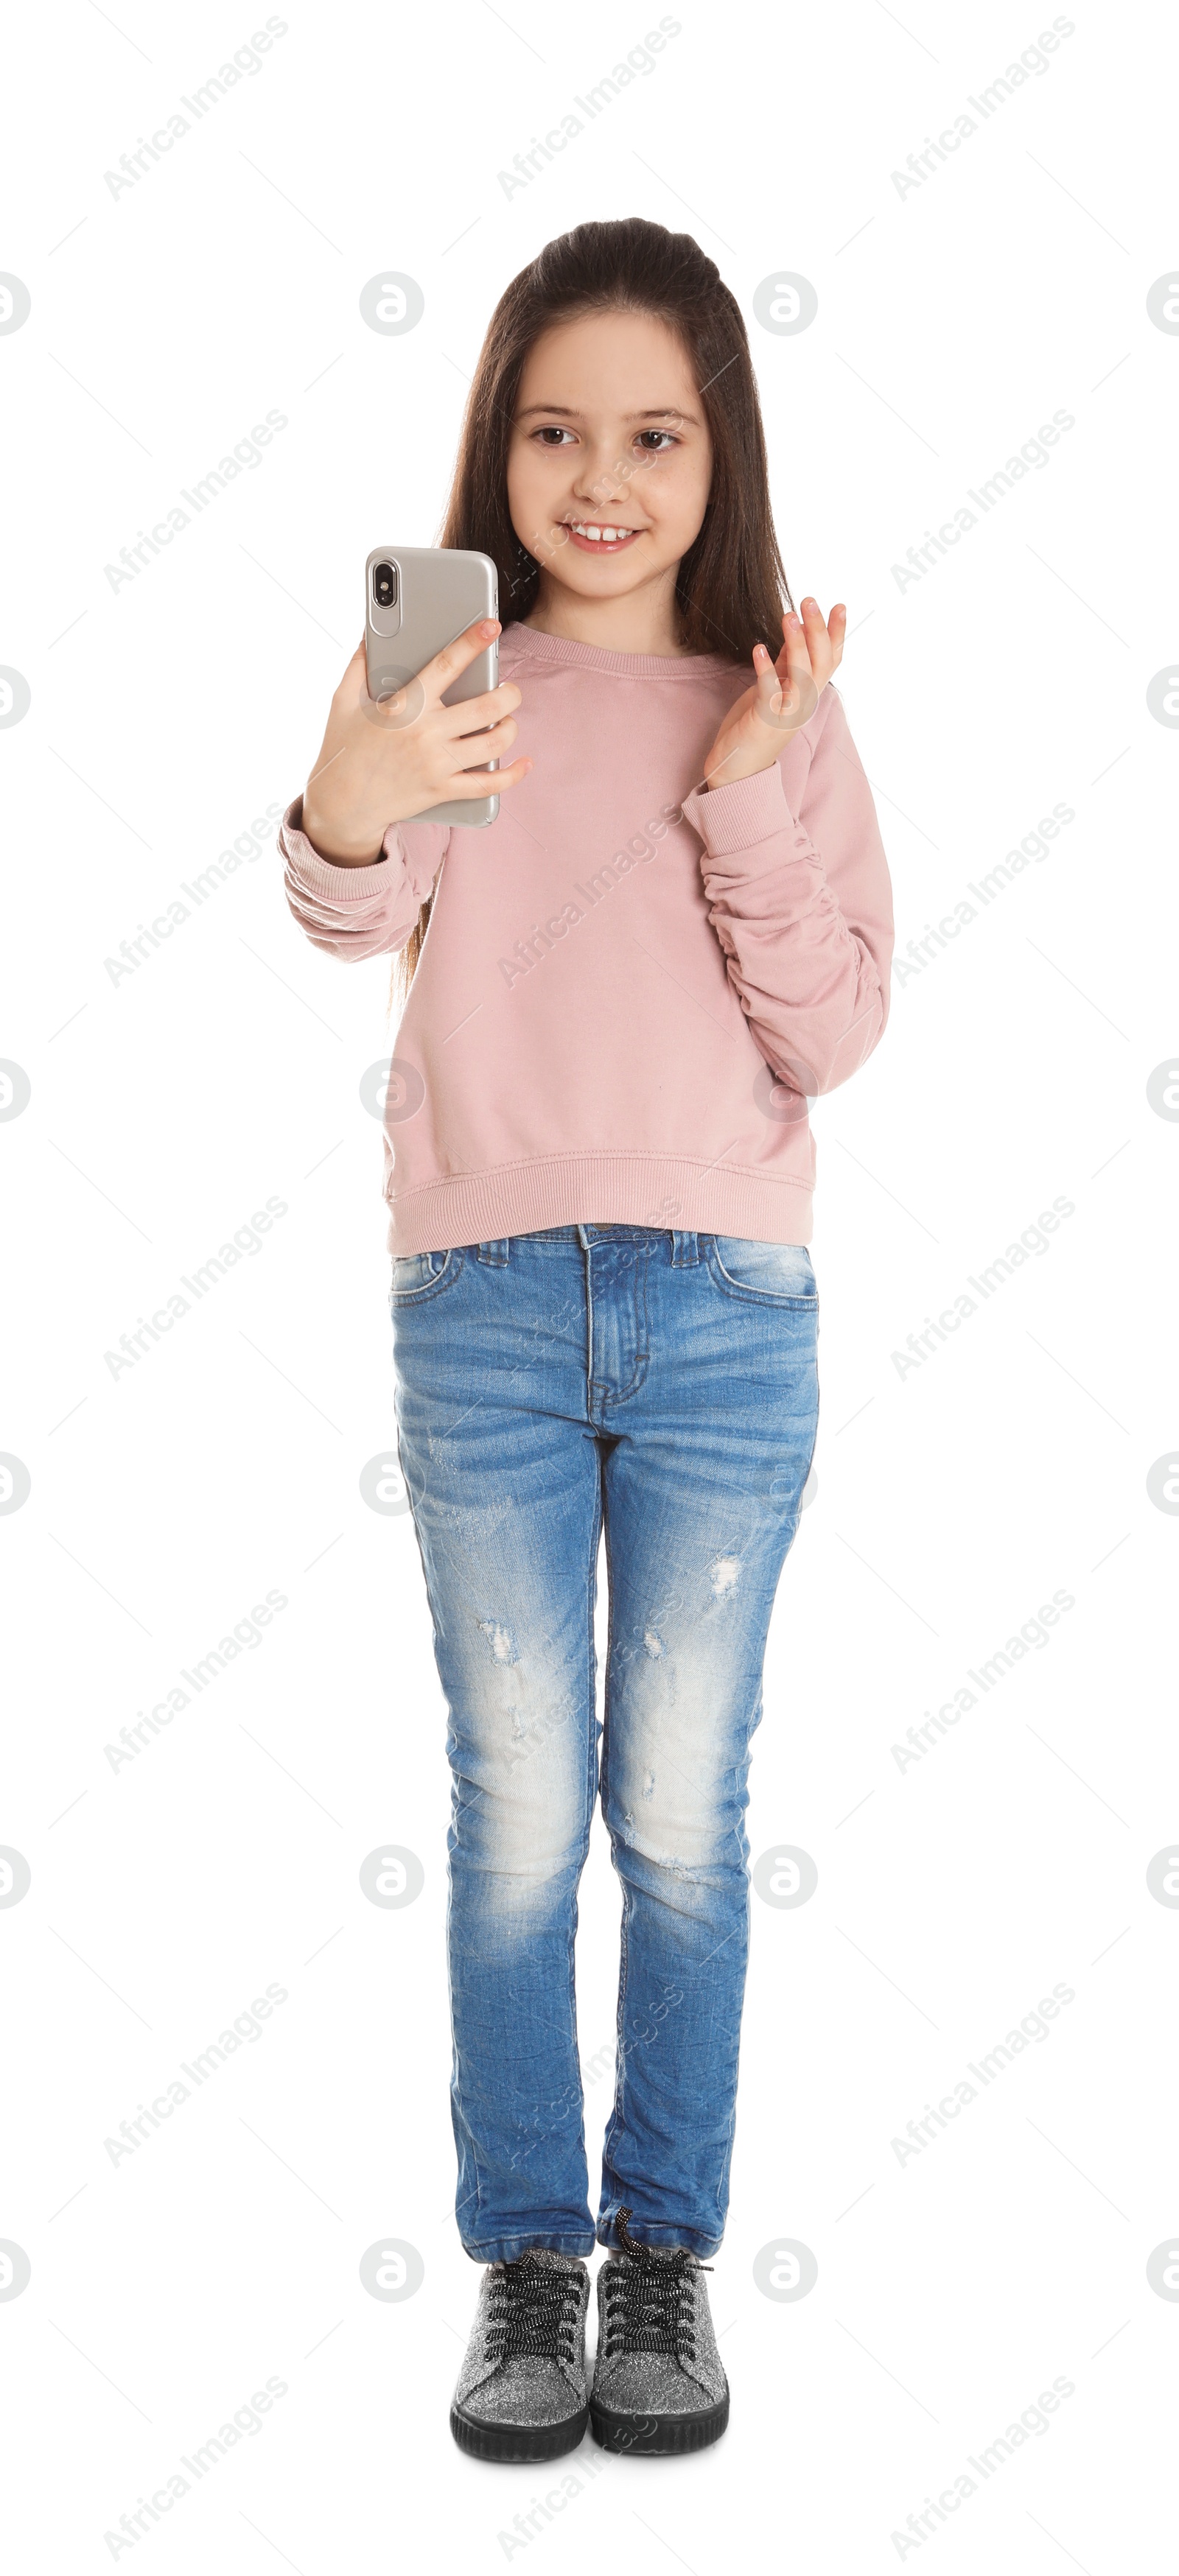 Photo of Little girl using video chat on smartphone, white background